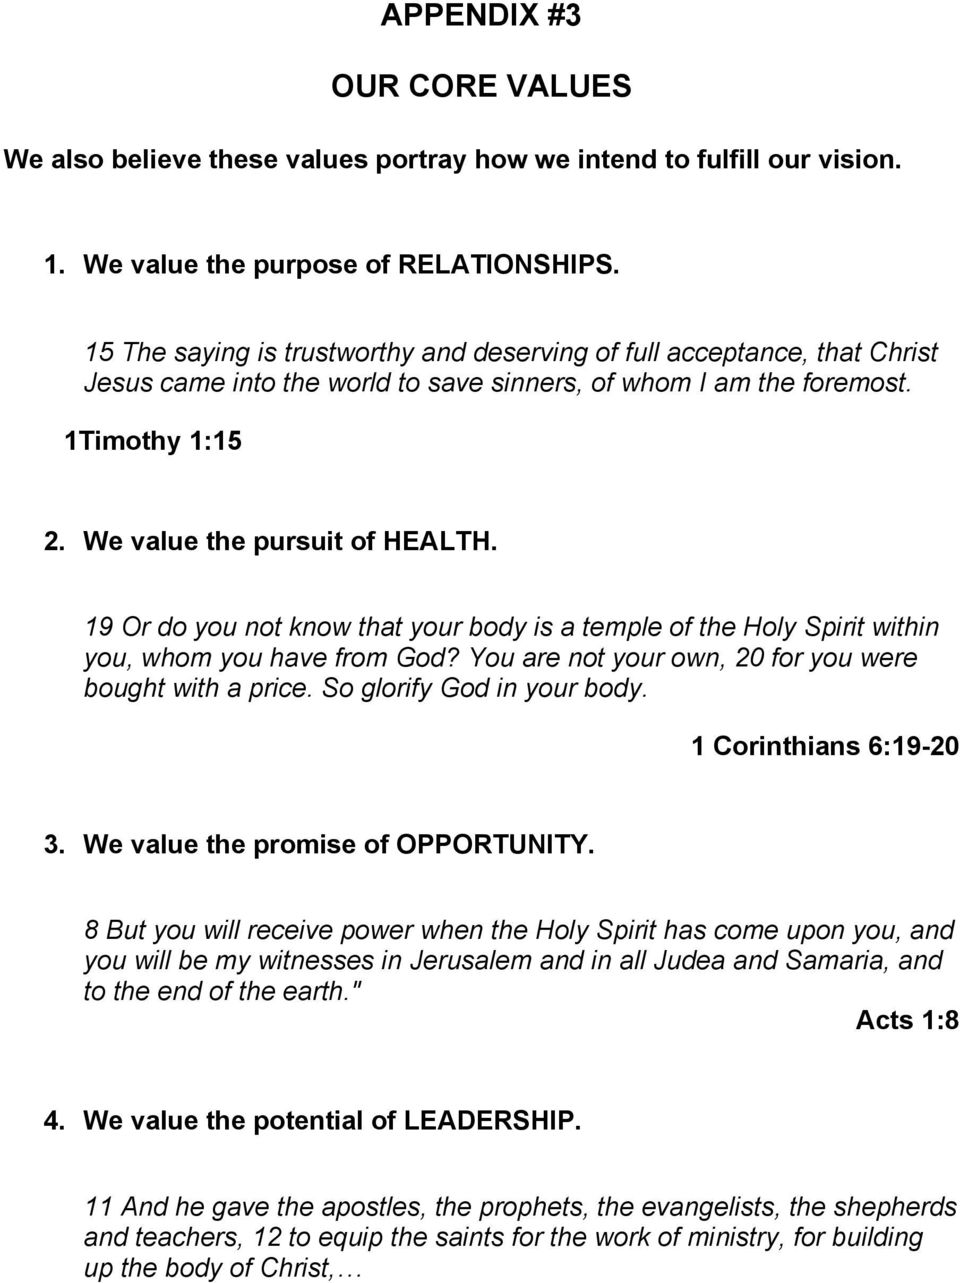 19 Or do you not know that your body is a temple of the Holy Spirit within you, whom you have from God? You are not your own, 20 for you were bought with a price. So glorify God in your body.